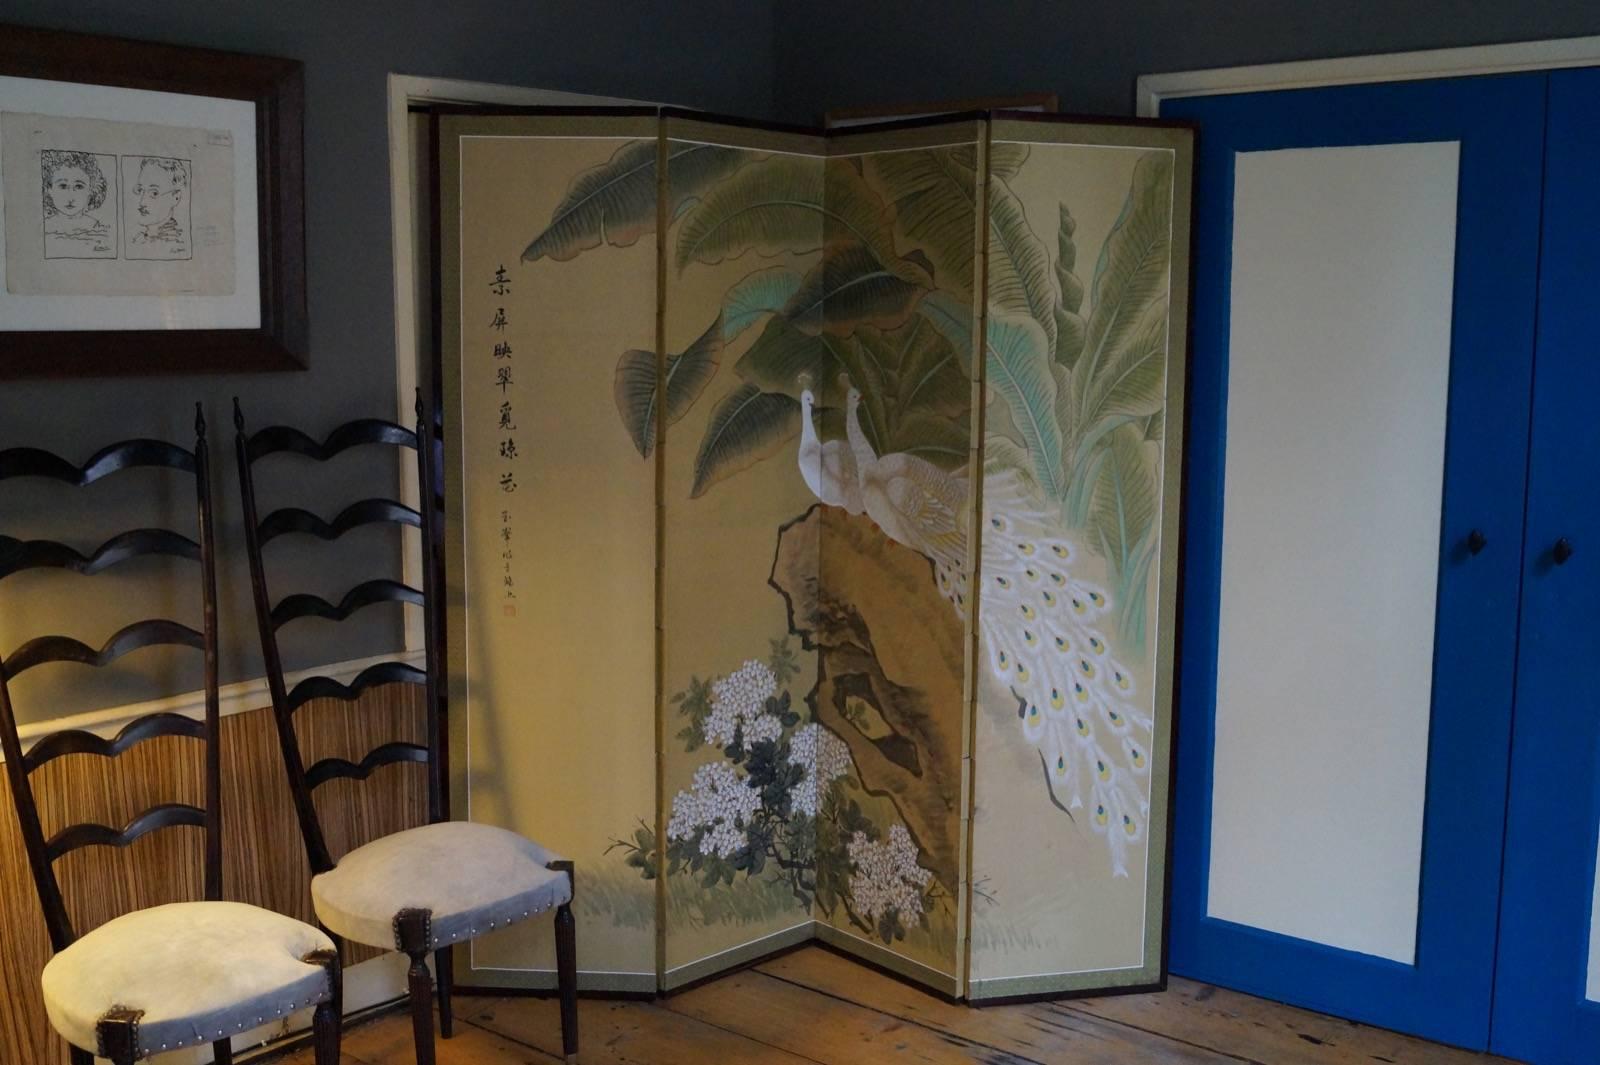 Midcentury hand-painted Chinese screen with white peacocks and floral motives.
Measures: H x W 188 cm x 184 cm.